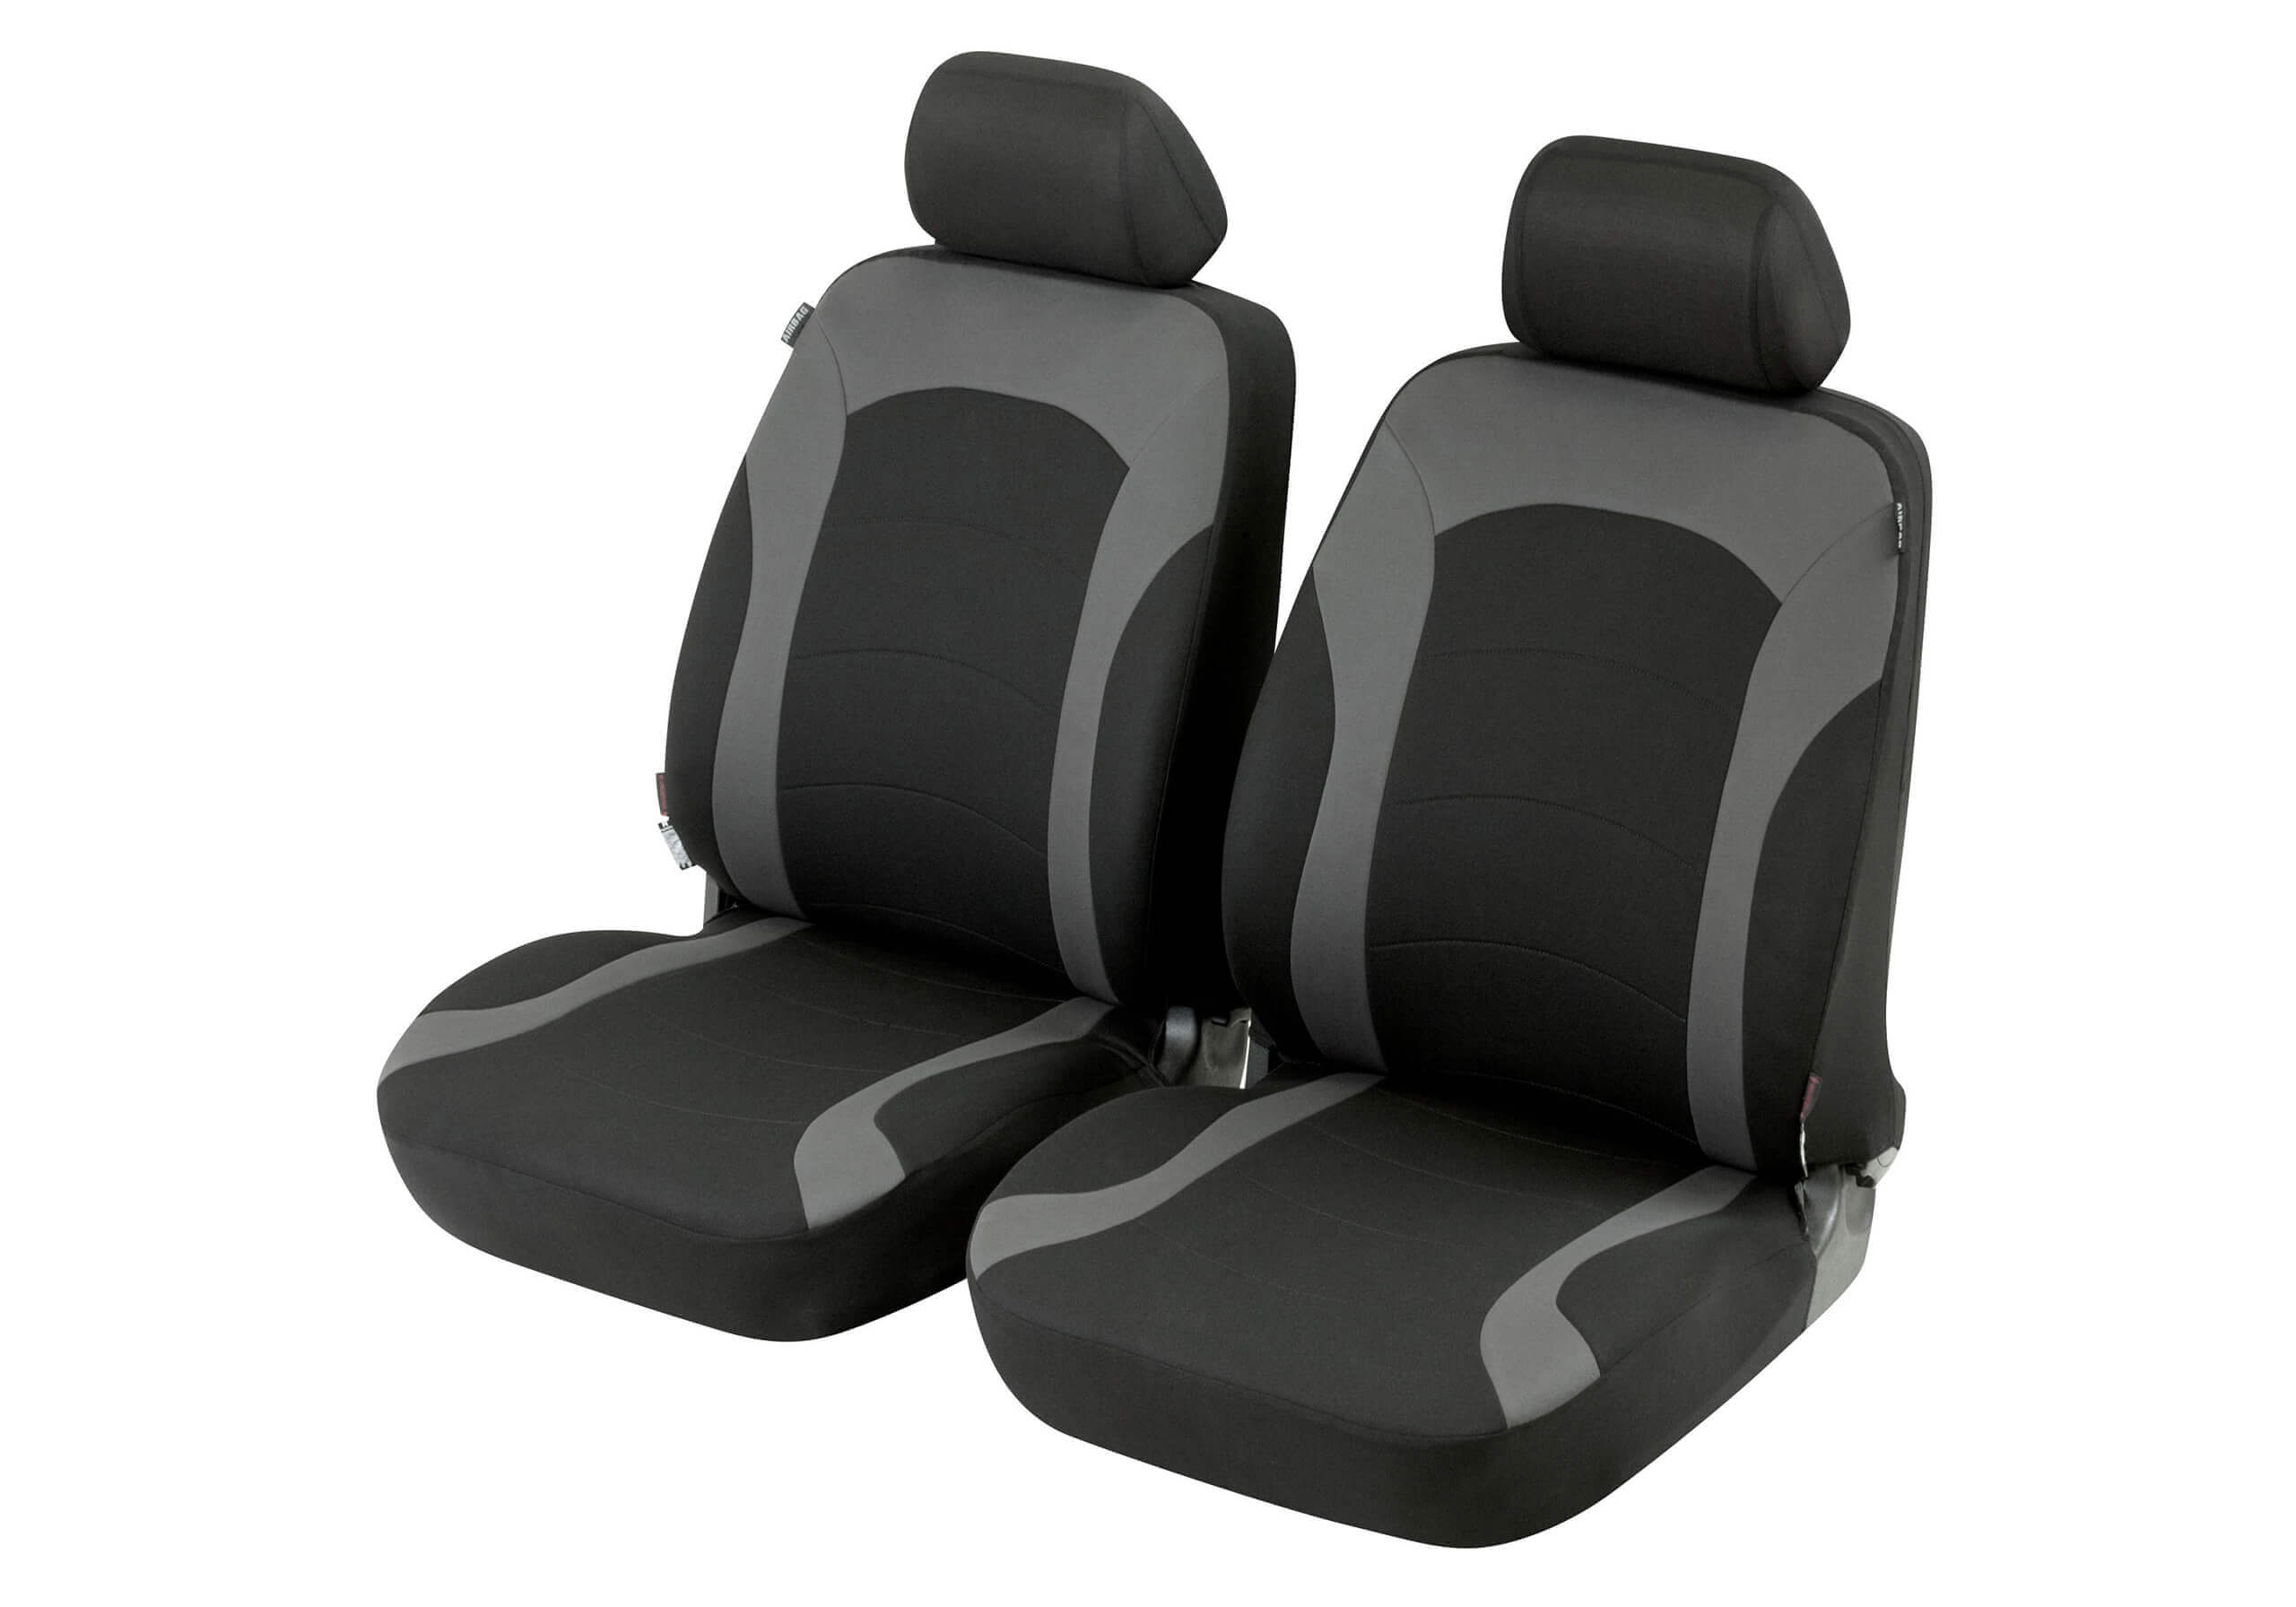 Ford Focus estate (2008 to 2011):Walser ZIPP-IT seat covers, front seats only, Inde black-grey, 11785